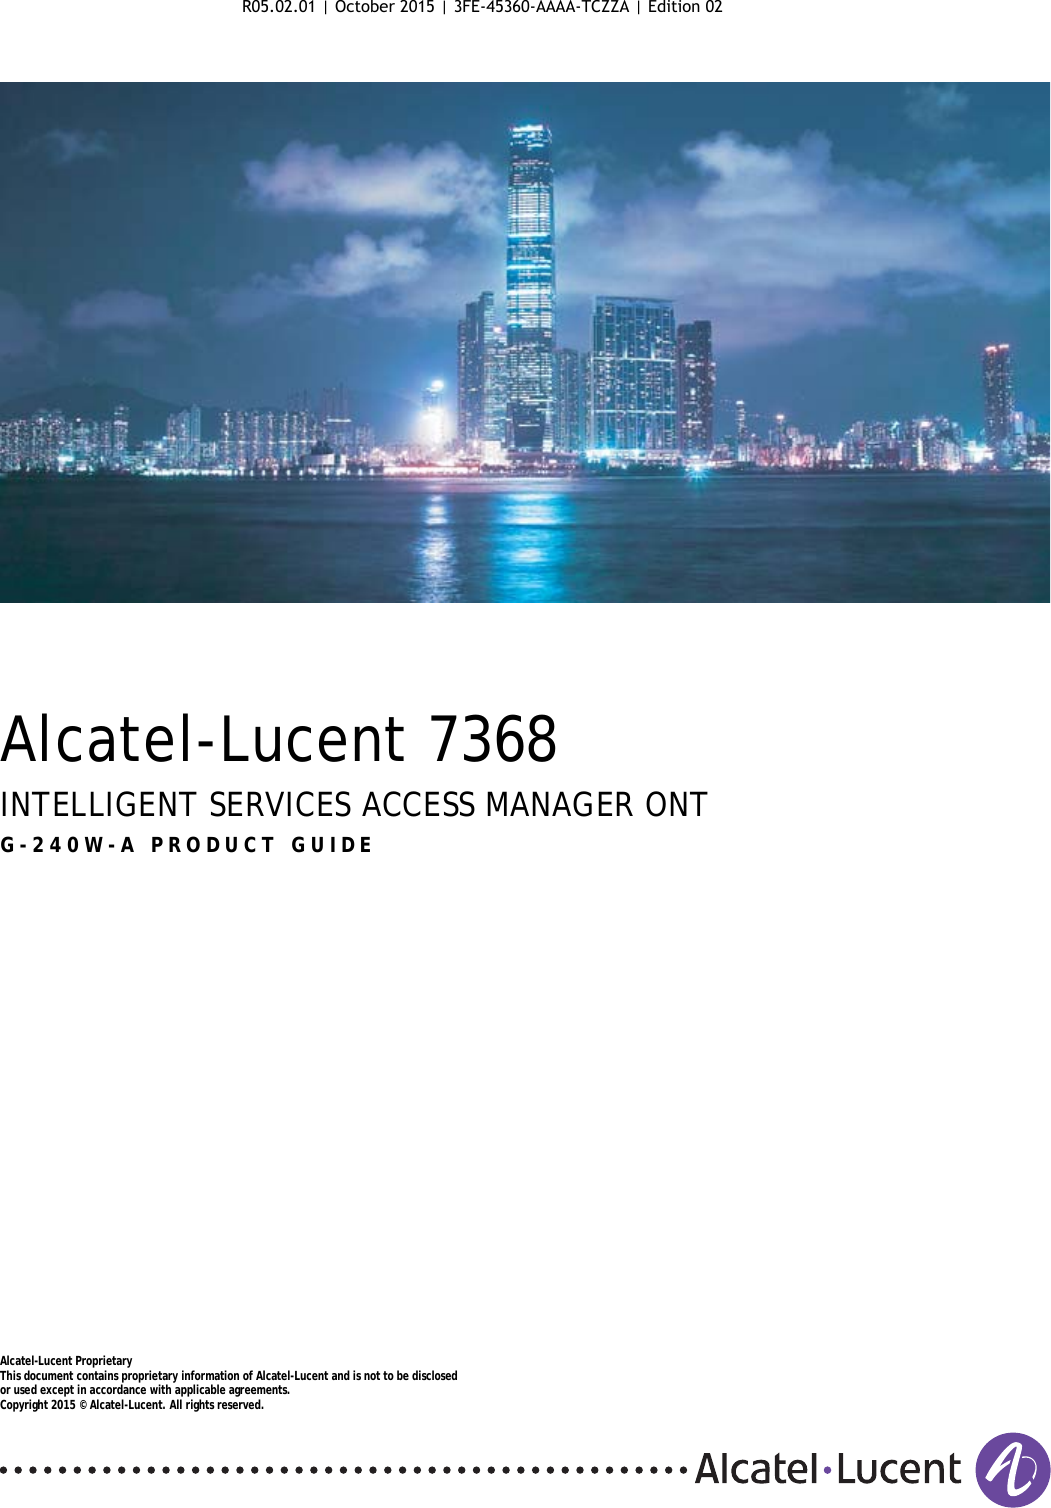 Alcatel-Lucent 7368INTELLIGENT SERVICES ACCESS MANAGER ONTG-240W-A PRODUCT GUIDEAlcatel-Lucent ProprietaryThis document contains proprietary information of Alcatel-Lucent and is not to be disclosedor used except in accordance with applicable agreements.Copyright 2015 © Alcatel-Lucent. All rights reserved.G-240W-A PRODUCT GUIDE R05.02.01 | October 2015 | 3FE-45360-AAAA-TCZZA | Edition 02 